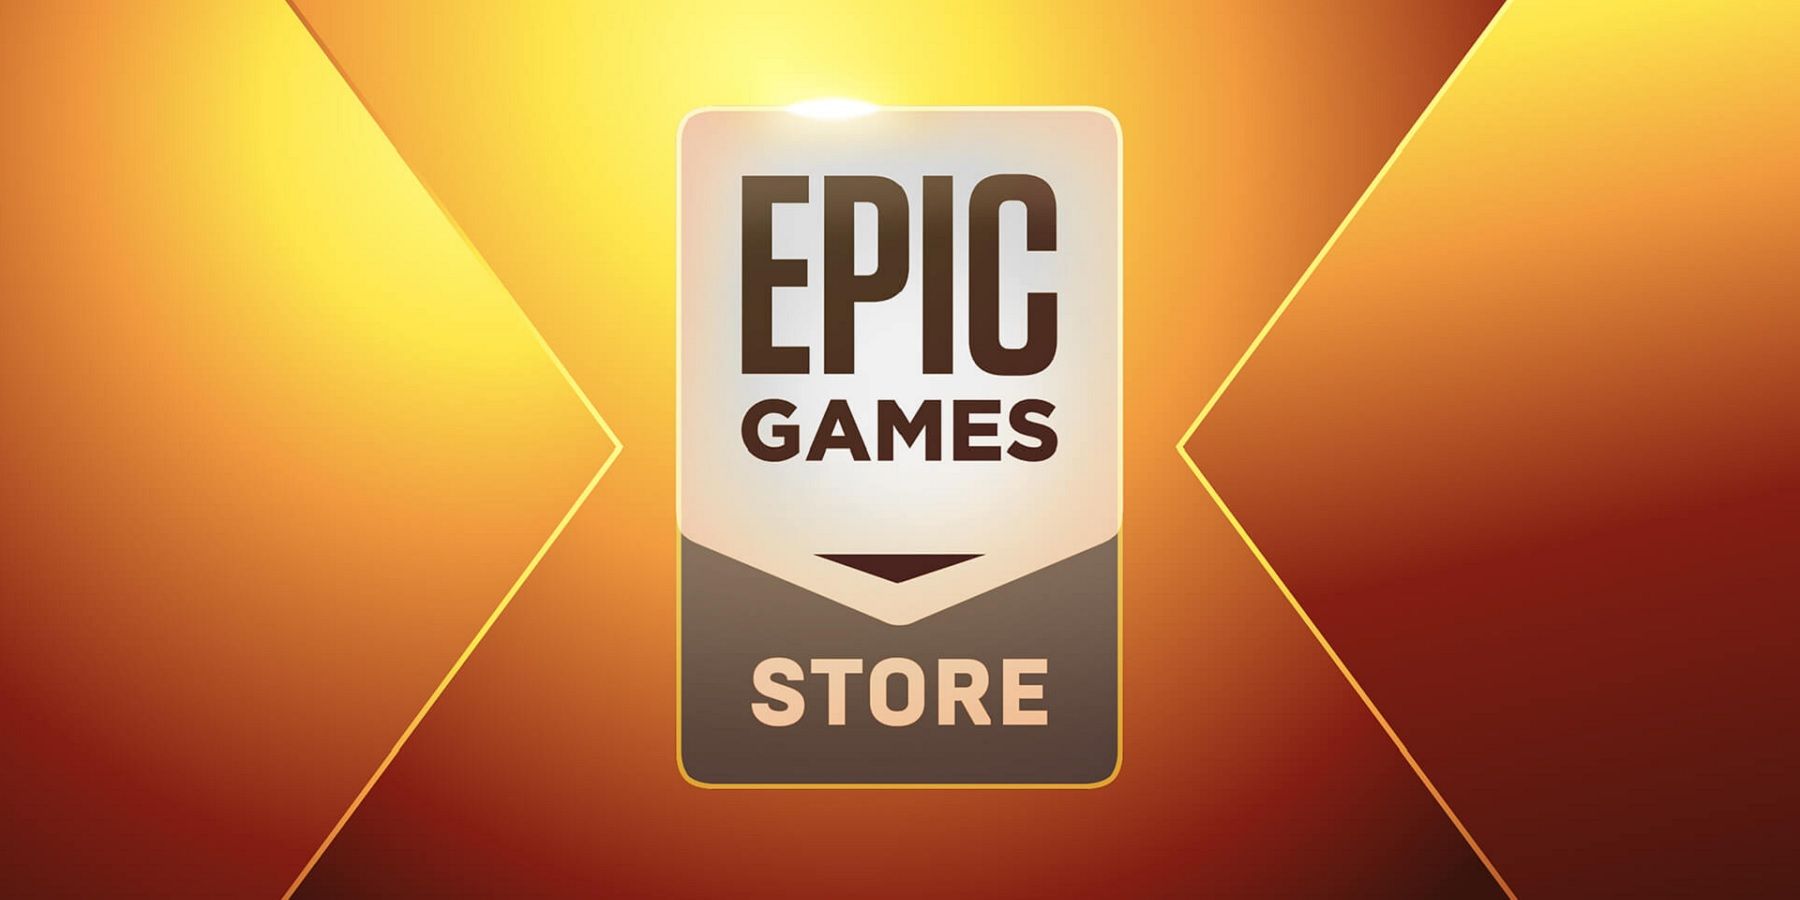 Evil Dead: The Game and Dark Deity are next week's free Epic Store